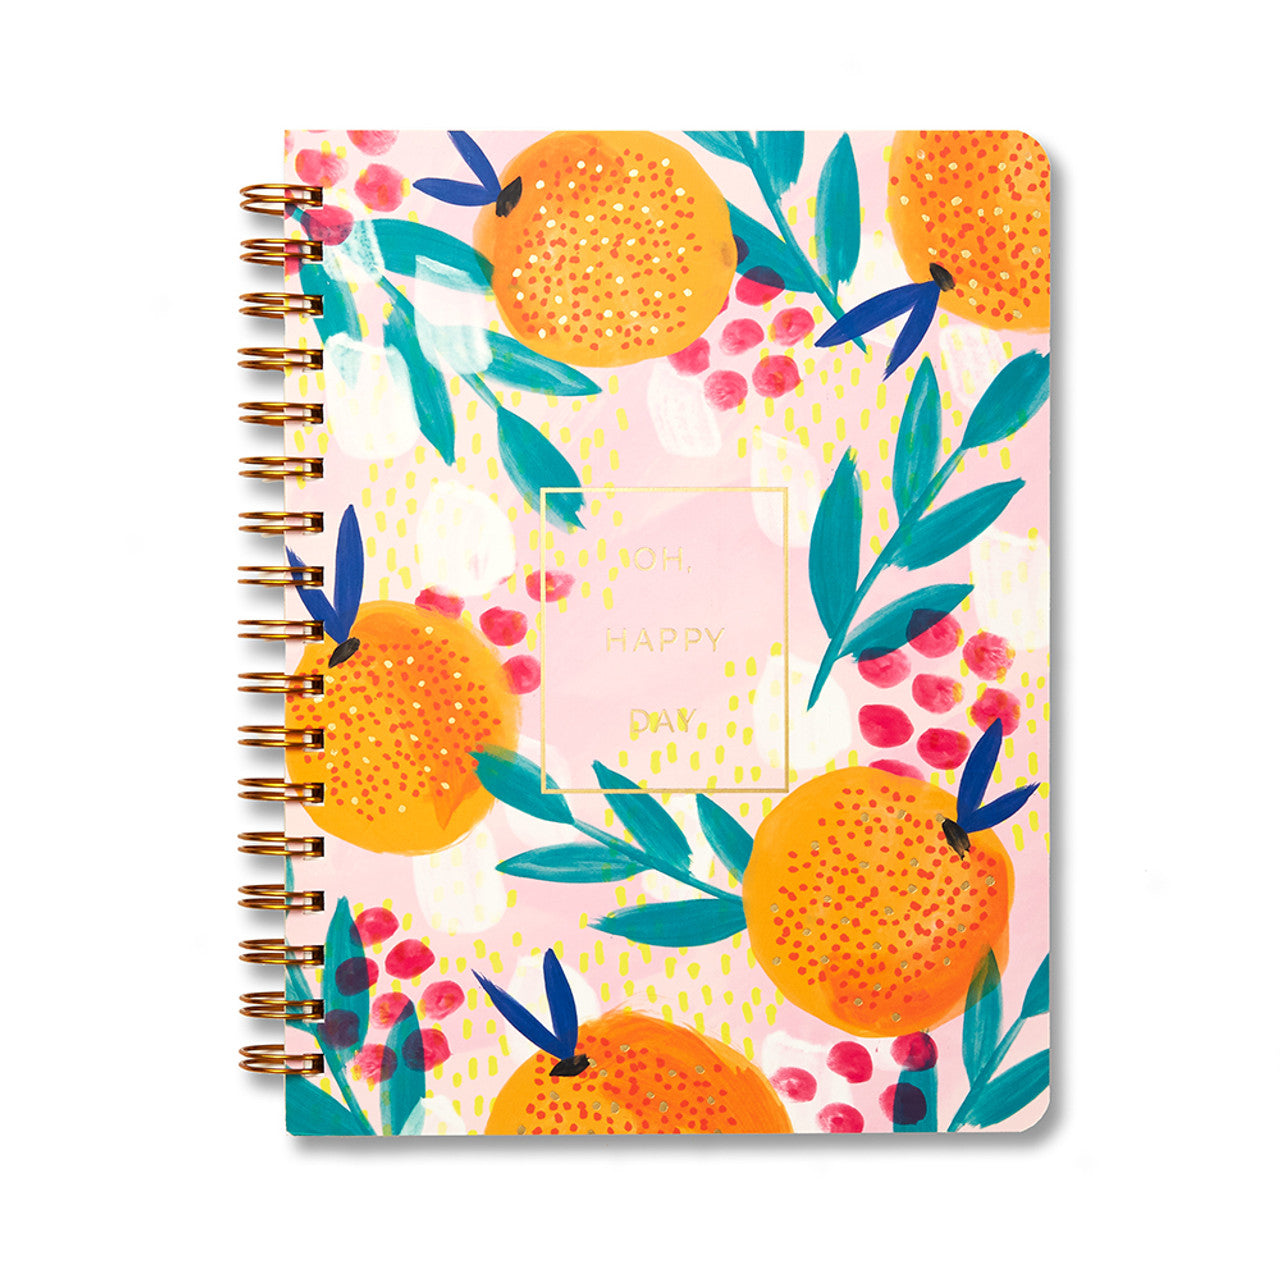 OH HAPPY DAY Spiral Notebook